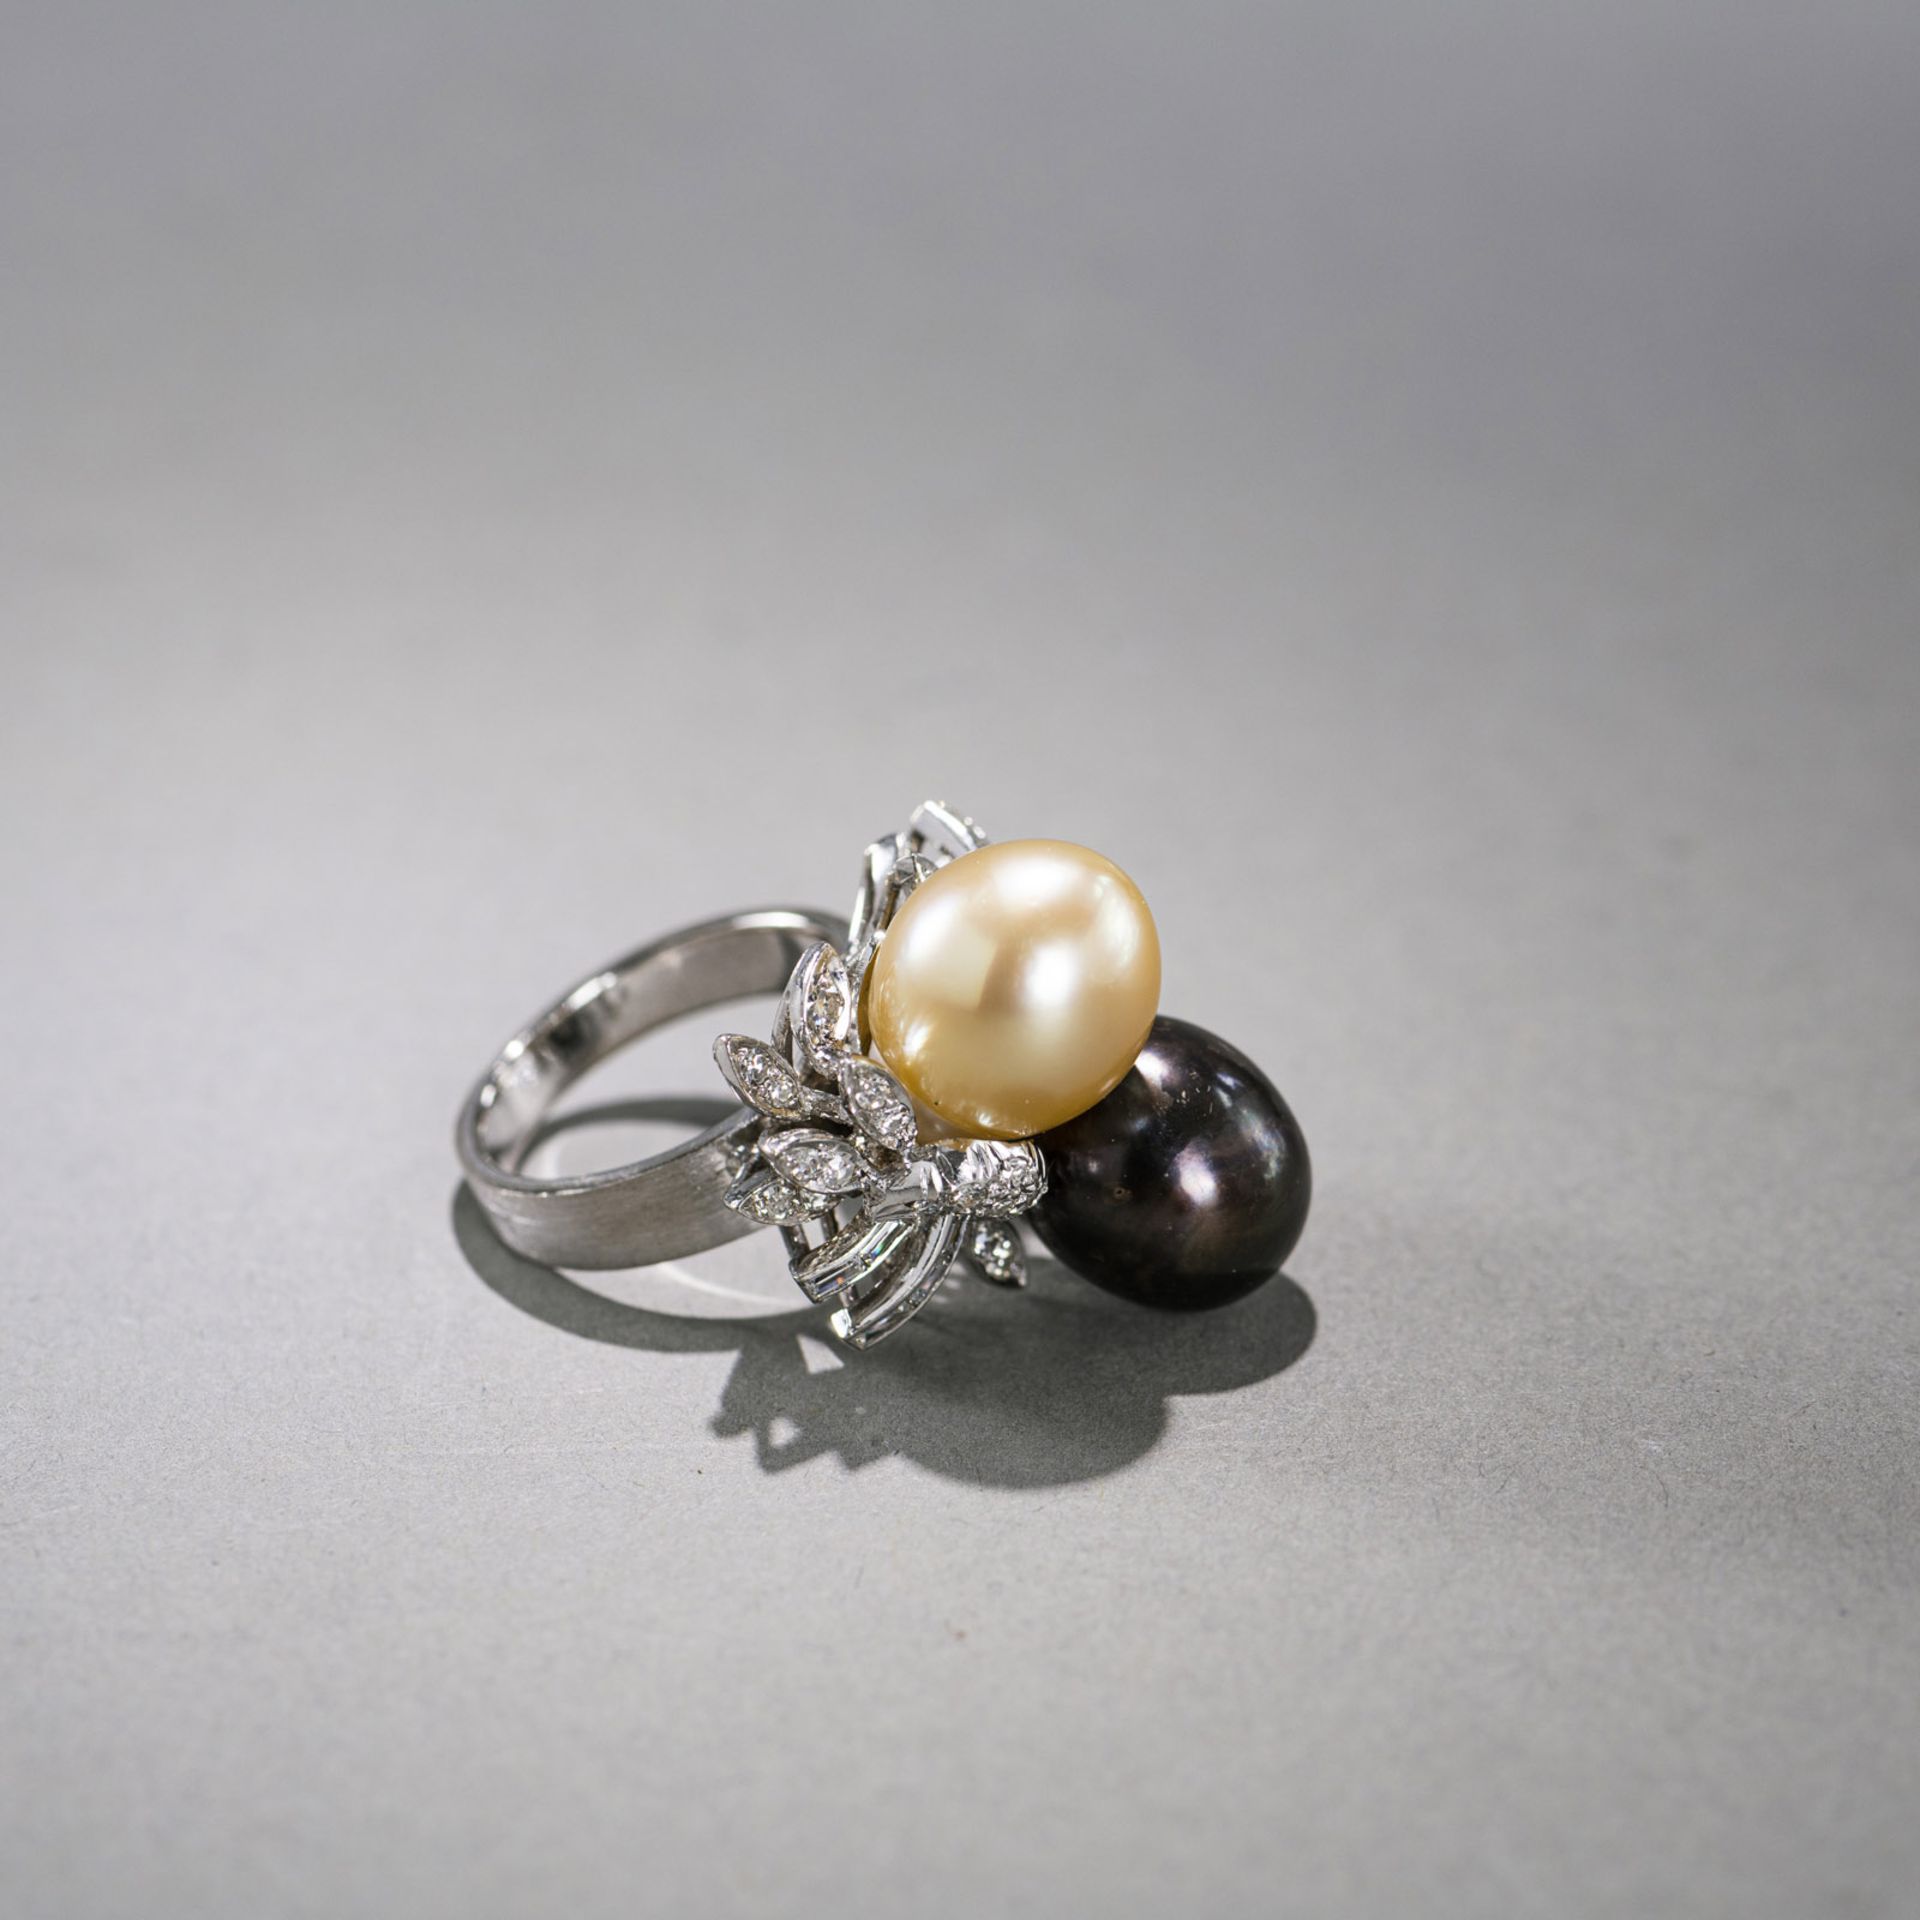 A DECORATIVE PEARL AND DIAMOND RING